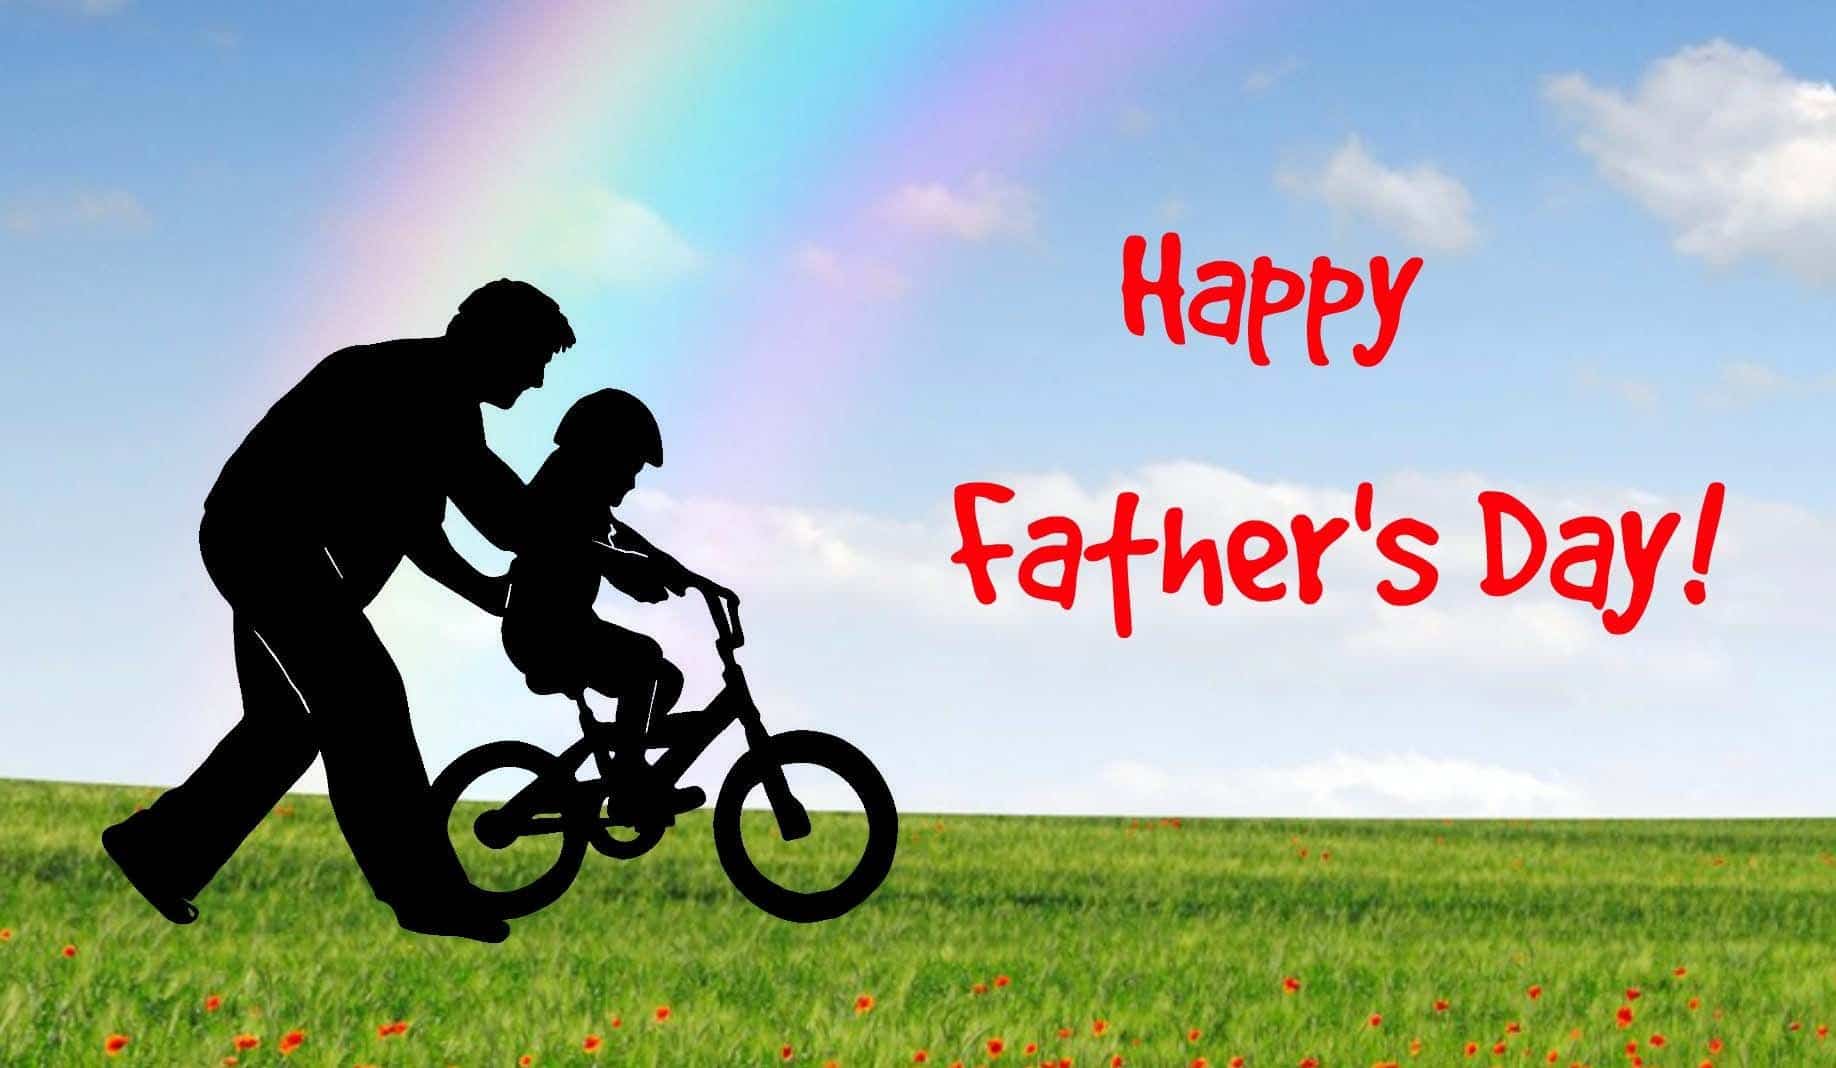 Fathers Day Wallpaper For Facebook